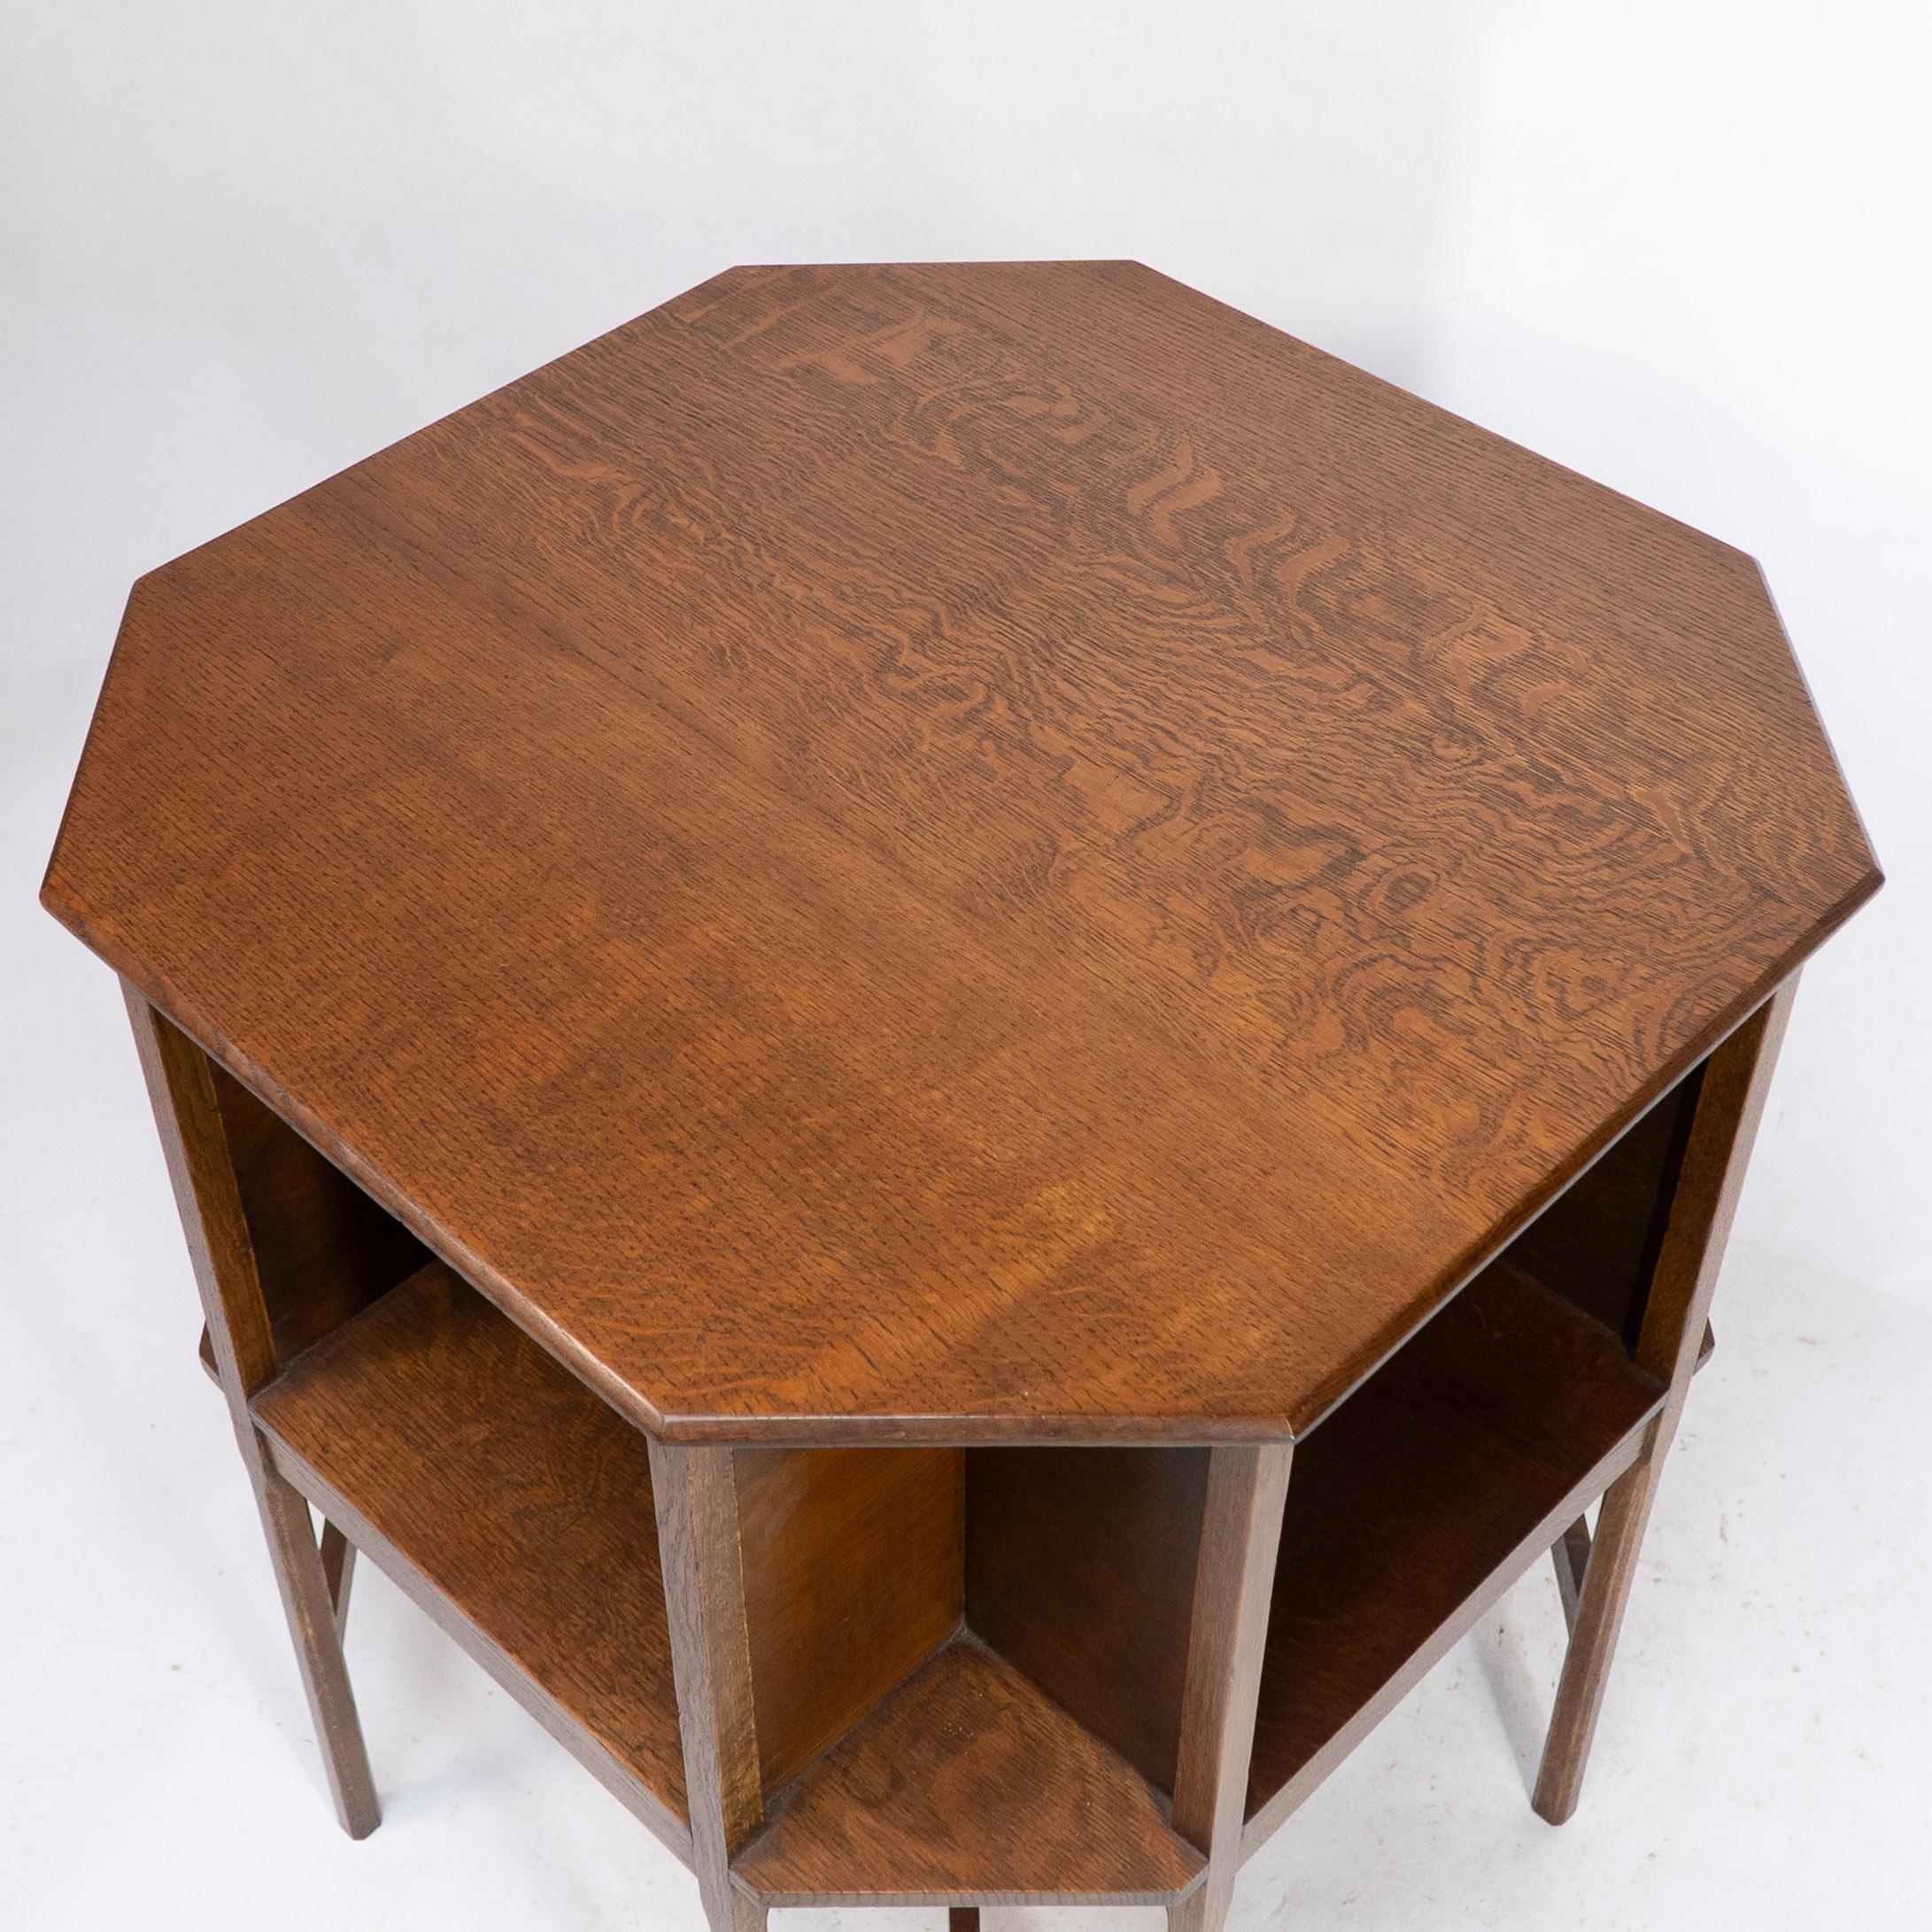 Ambrose Heals Attri, An Arts & Crafts Oak Octagonal Book Table with Eight Legs For Sale 2